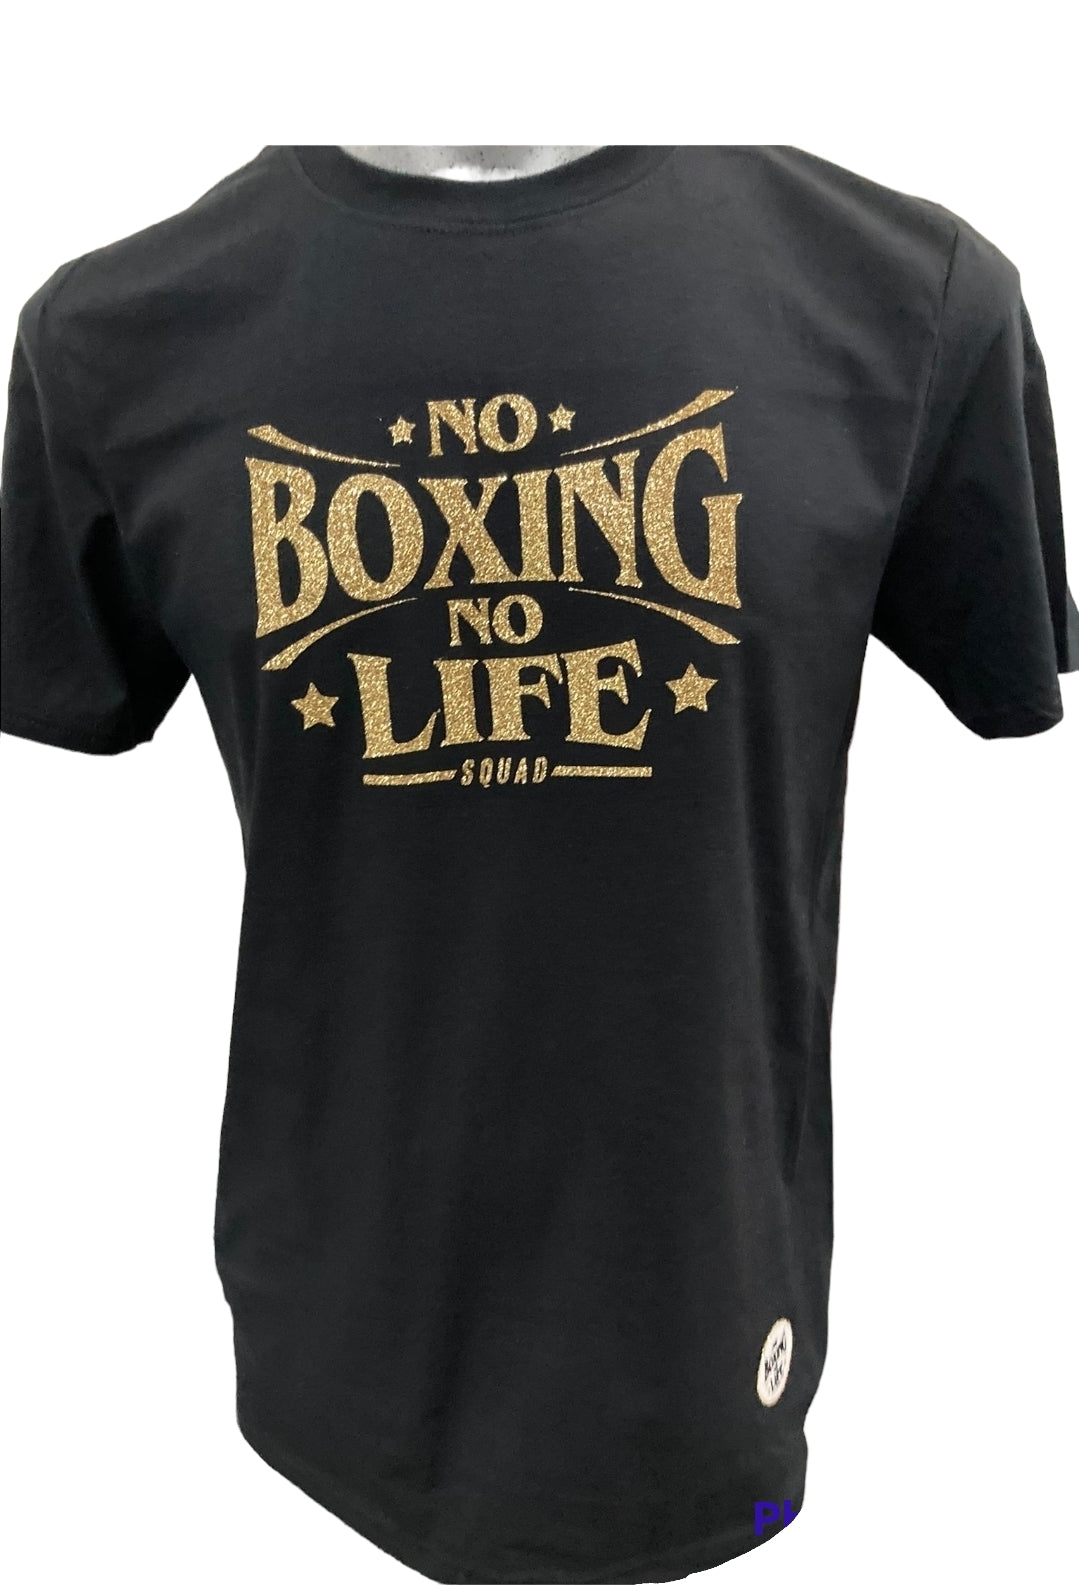 OFFICIAL NO BOXING NO LIFE - T Shirt Black with Gold